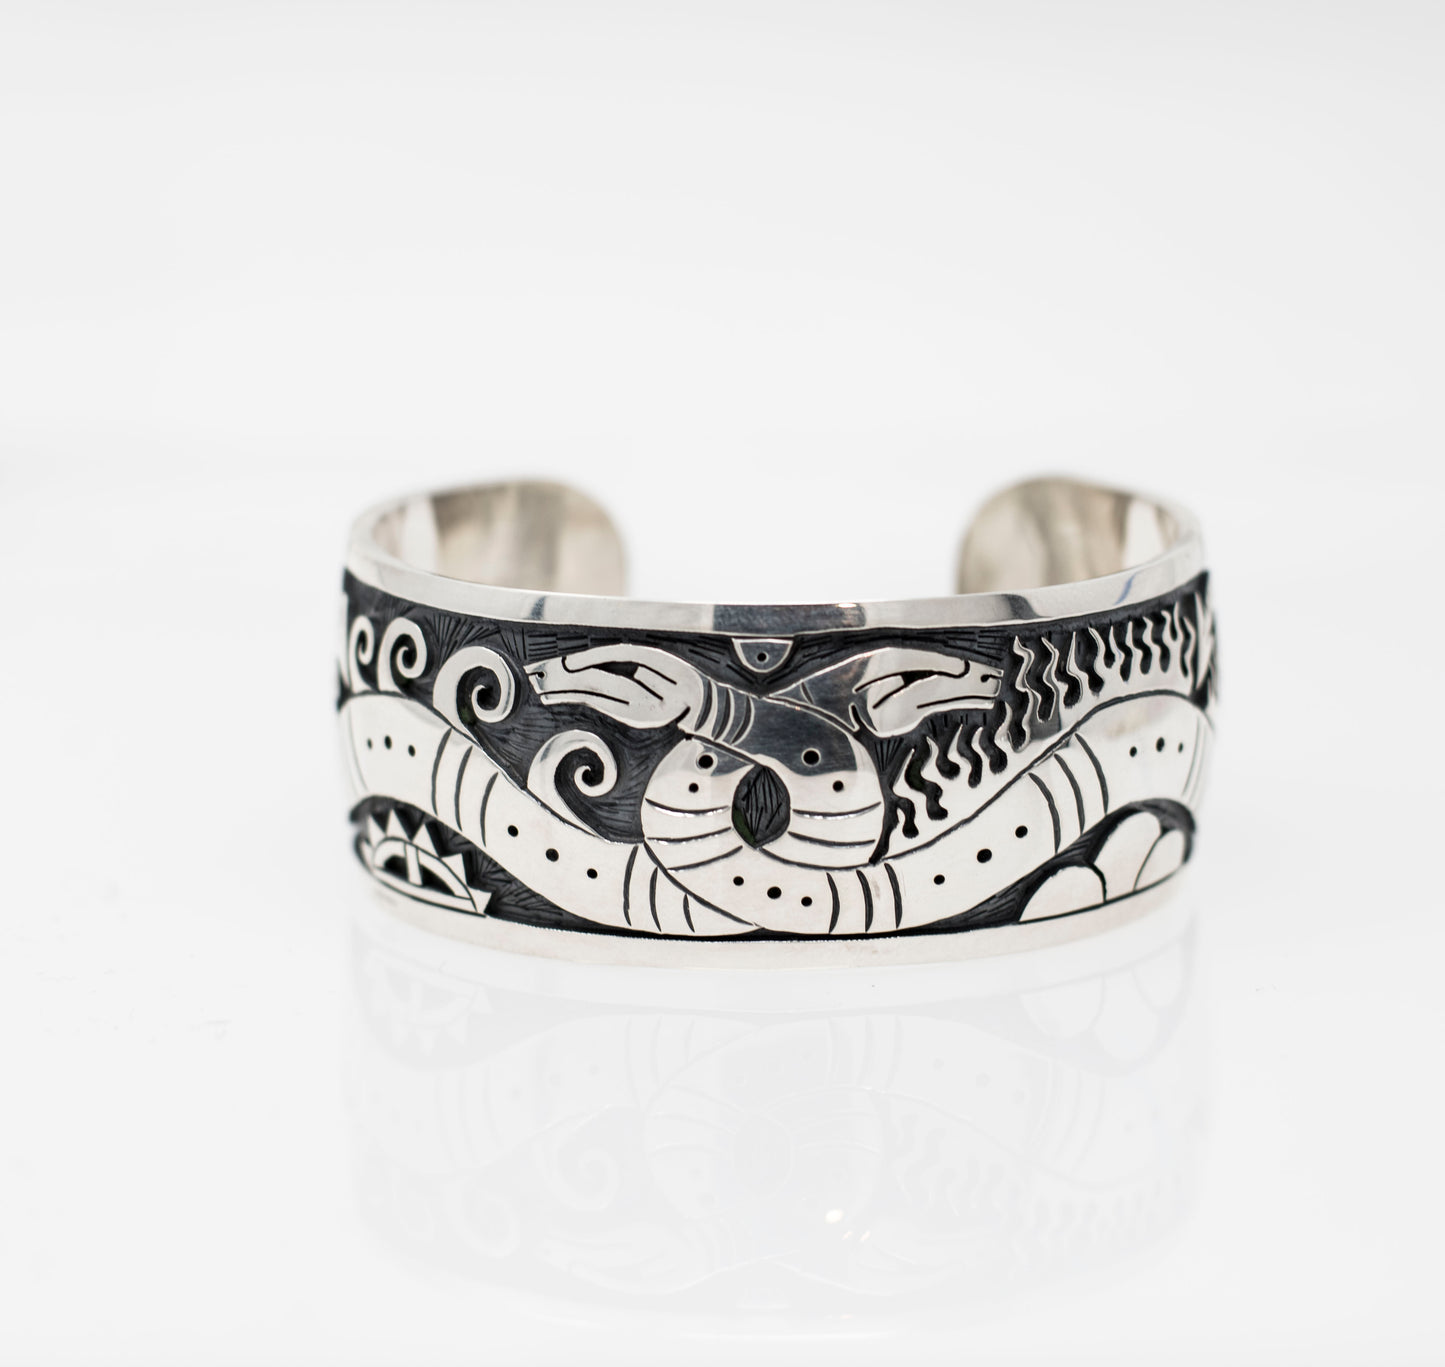 Hopi Water and Fire Snake Cuff